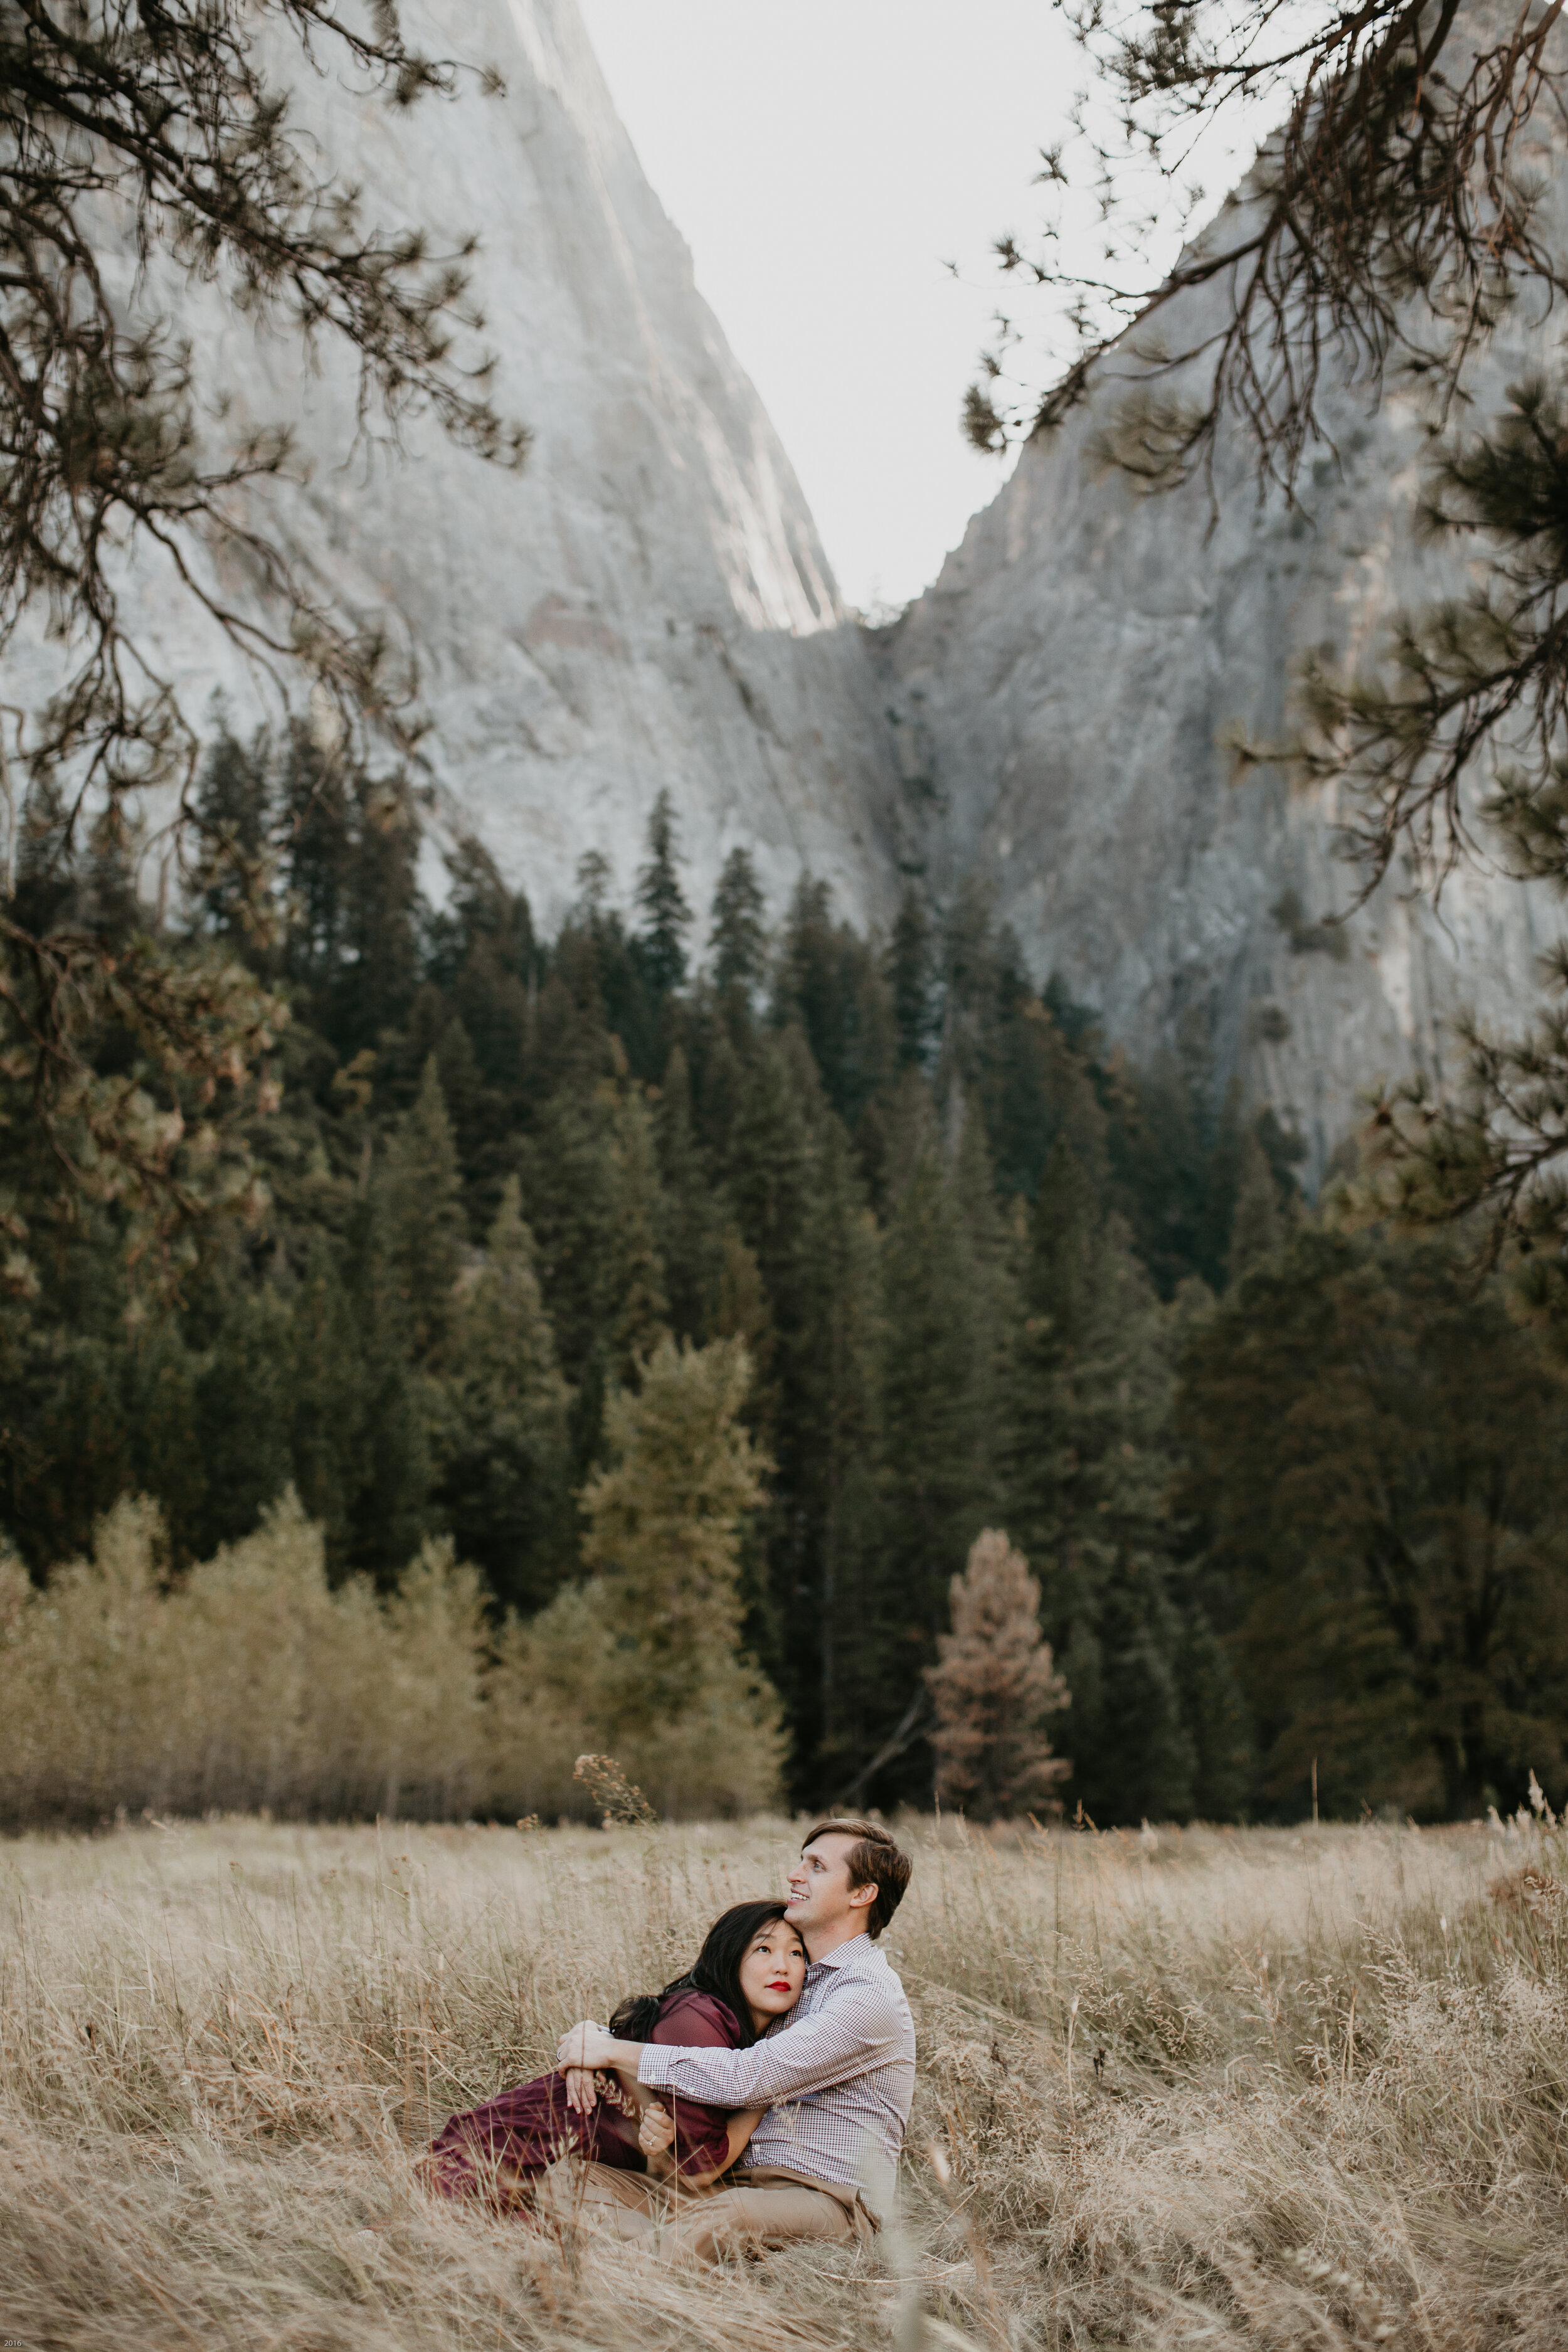 yosemite-national-park-couples-session-at-taft-point-and-yosemite-valley-yosemite-elopement-photographer-nicole-daacke-photography-114.jpg